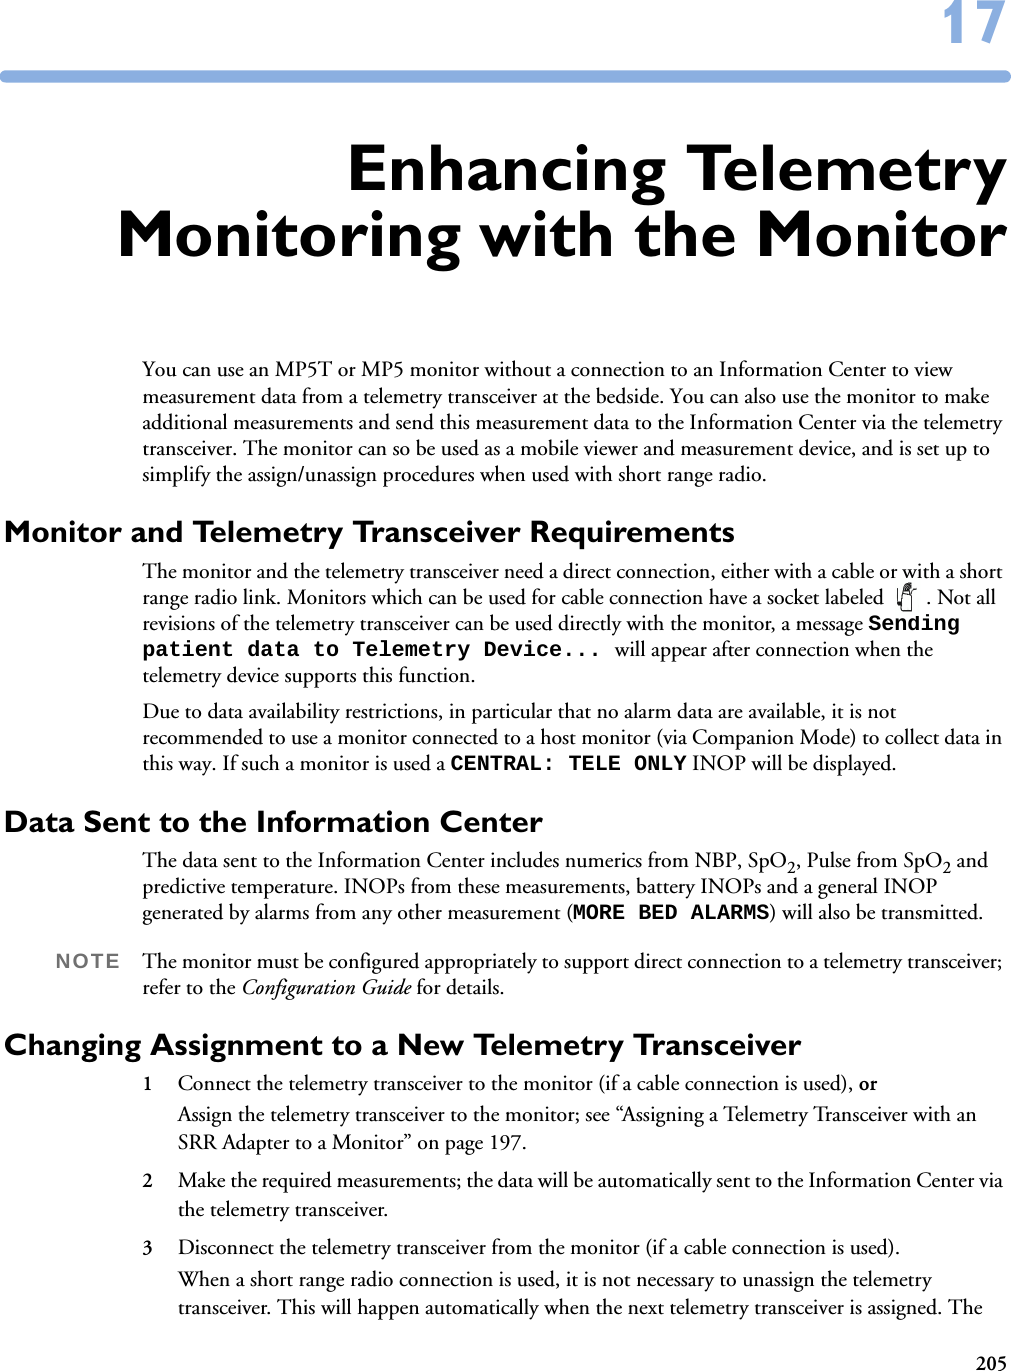 2051717Enhancing TelemetryMonitoring with the MonitorYou can use an MP5T or MP5 monitor without a connection to an Information Center to view measurement data from a telemetry transceiver at the bedside. You can also use the monitor to make additional measurements and send this measurement data to the Information Center via the telemetry transceiver. The monitor can so be used as a mobile viewer and measurement device, and is set up to simplify the assign/unassign procedures when used with short range radio. Monitor and Telemetry Transceiver RequirementsThe monitor and the telemetry transceiver need a direct connection, either with a cable or with a short range radio link. Monitors which can be used for cable connection have a socket labeled  . Not all revisions of the telemetry transceiver can be used directly with the monitor, a message Sending patient data to Telemetry Device... will appear after connection when the telemetry device supports this function. Due to data availability restrictions, in particular that no alarm data are available, it is not recommended to use a monitor connected to a host monitor (via Companion Mode) to collect data in this way. If such a monitor is used a CENTRAL: TELE ONLY INOP will be displayed. Data Sent to the Information CenterThe data sent to the Information Center includes numerics from NBP, SpO2, Pulse from SpO2 and predictive temperature. INOPs from these measurements, battery INOPs and a general INOP generated by alarms from any other measurement (MORE BED ALARMS) will also be transmitted.NOTE The monitor must be configured appropriately to support direct connection to a telemetry transceiver; refer to the Configuration Guide for details.Changing Assignment to a New Telemetry Transceiver1Connect the telemetry transceiver to the monitor (if a cable connection is used), or Assign the telemetry transceiver to the monitor; see “Assigning a Telemetry Transceiver with an SRR Adapter to a Monitor” on page 197. 2Make the required measurements; the data will be automatically sent to the Information Center via the telemetry transceiver. 3Disconnect the telemetry transceiver from the monitor (if a cable connection is used). When a short range radio connection is used, it is not necessary to unassign the telemetry transceiver. This will happen automatically when the next telemetry transceiver is assigned. The 